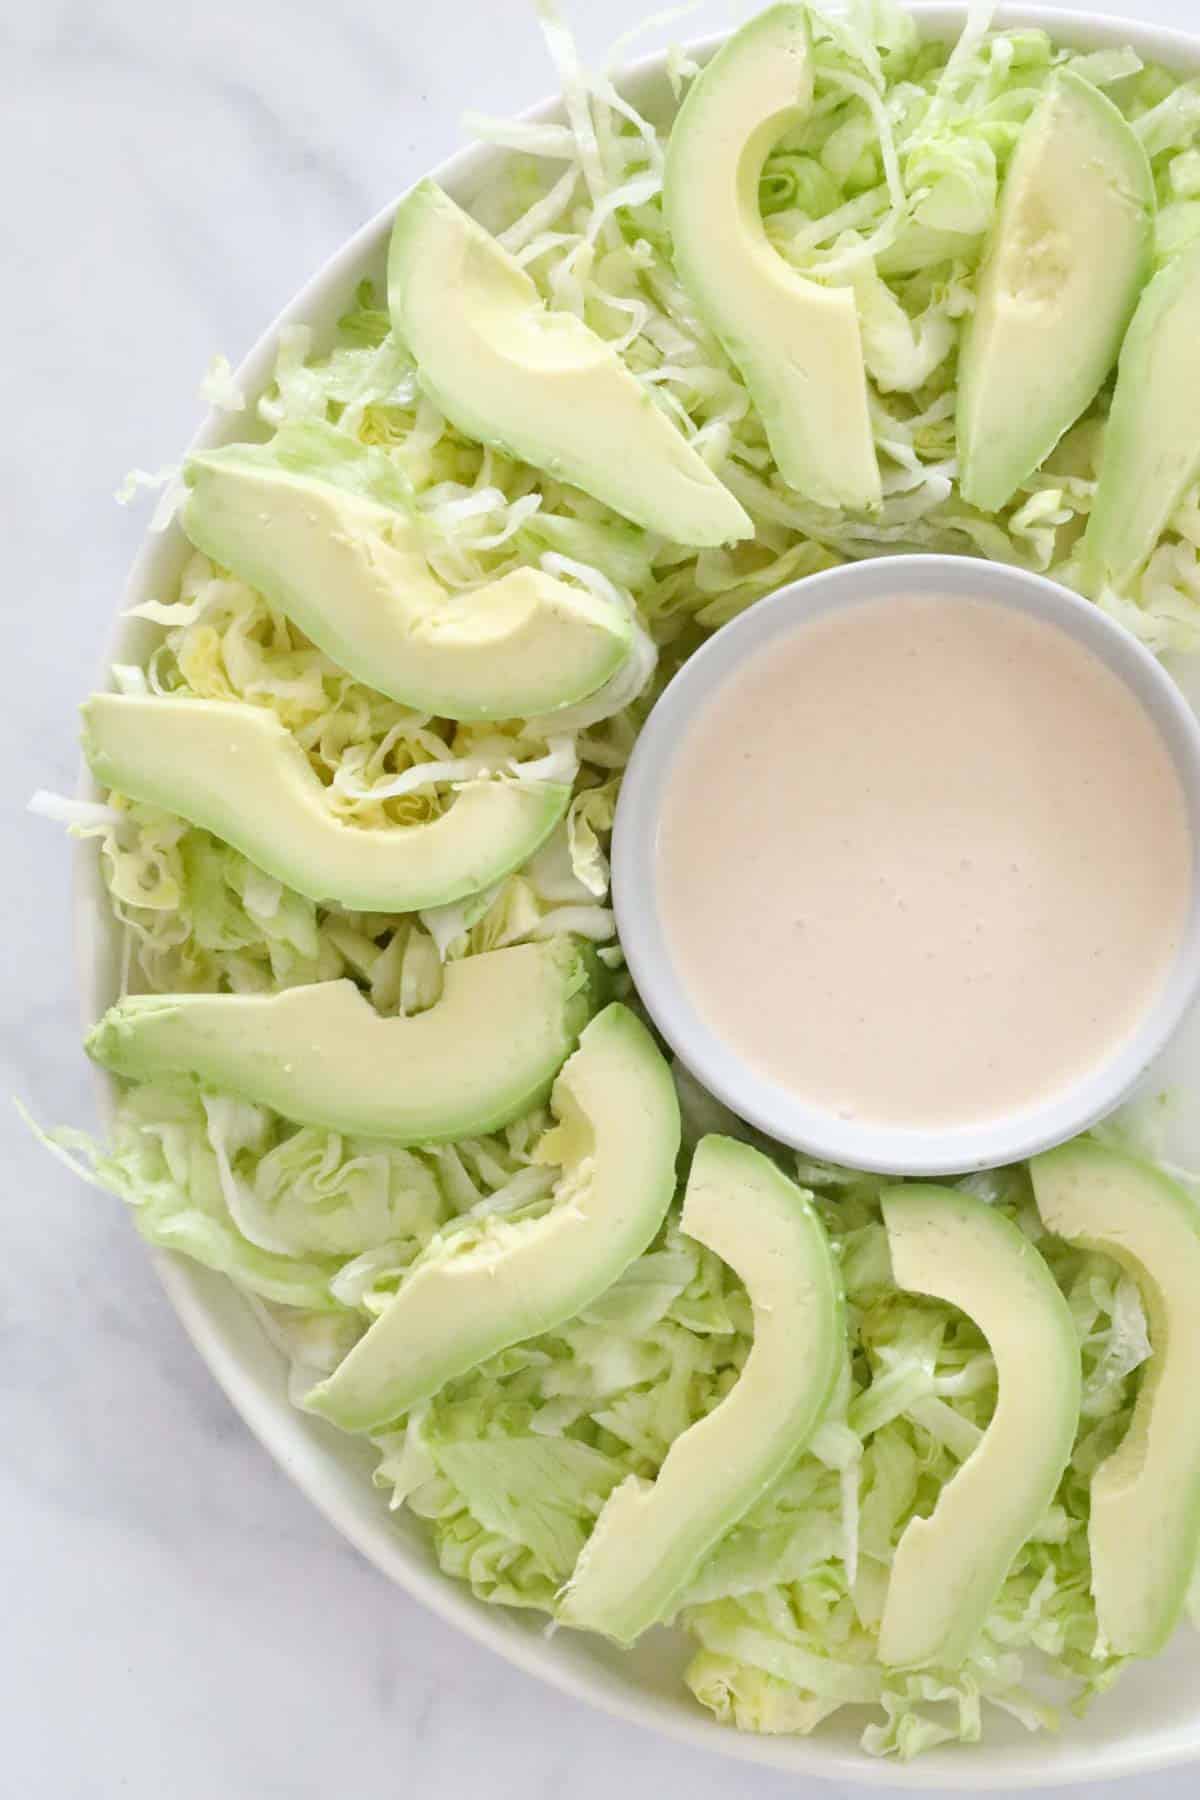 The ramekin of cocktail sauce placed on a serving platter surrounded by shredded lettuce and sliced avocado.